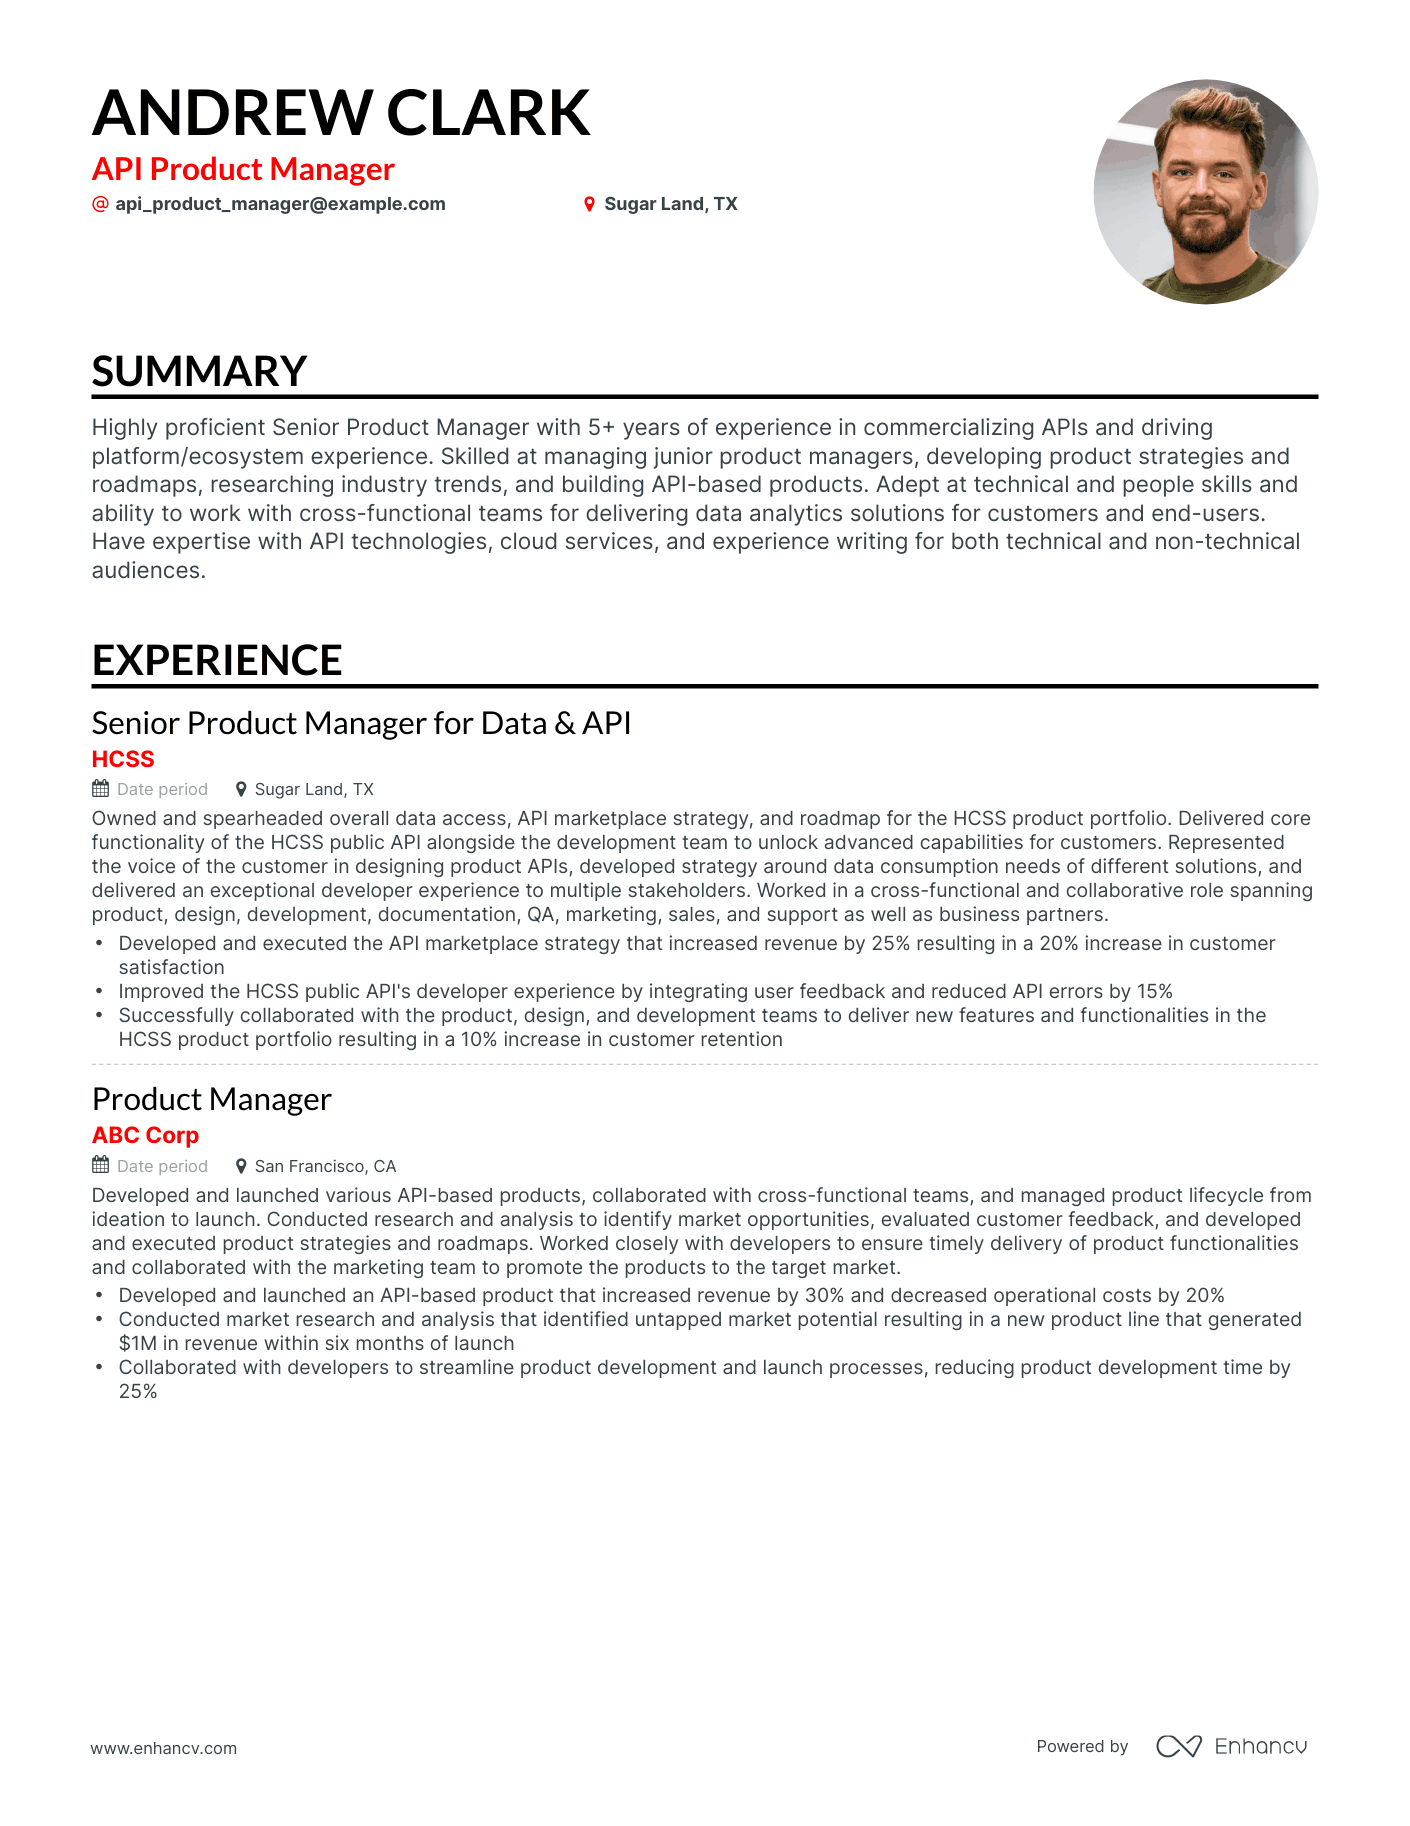 Classic API Product Manager Resume Template